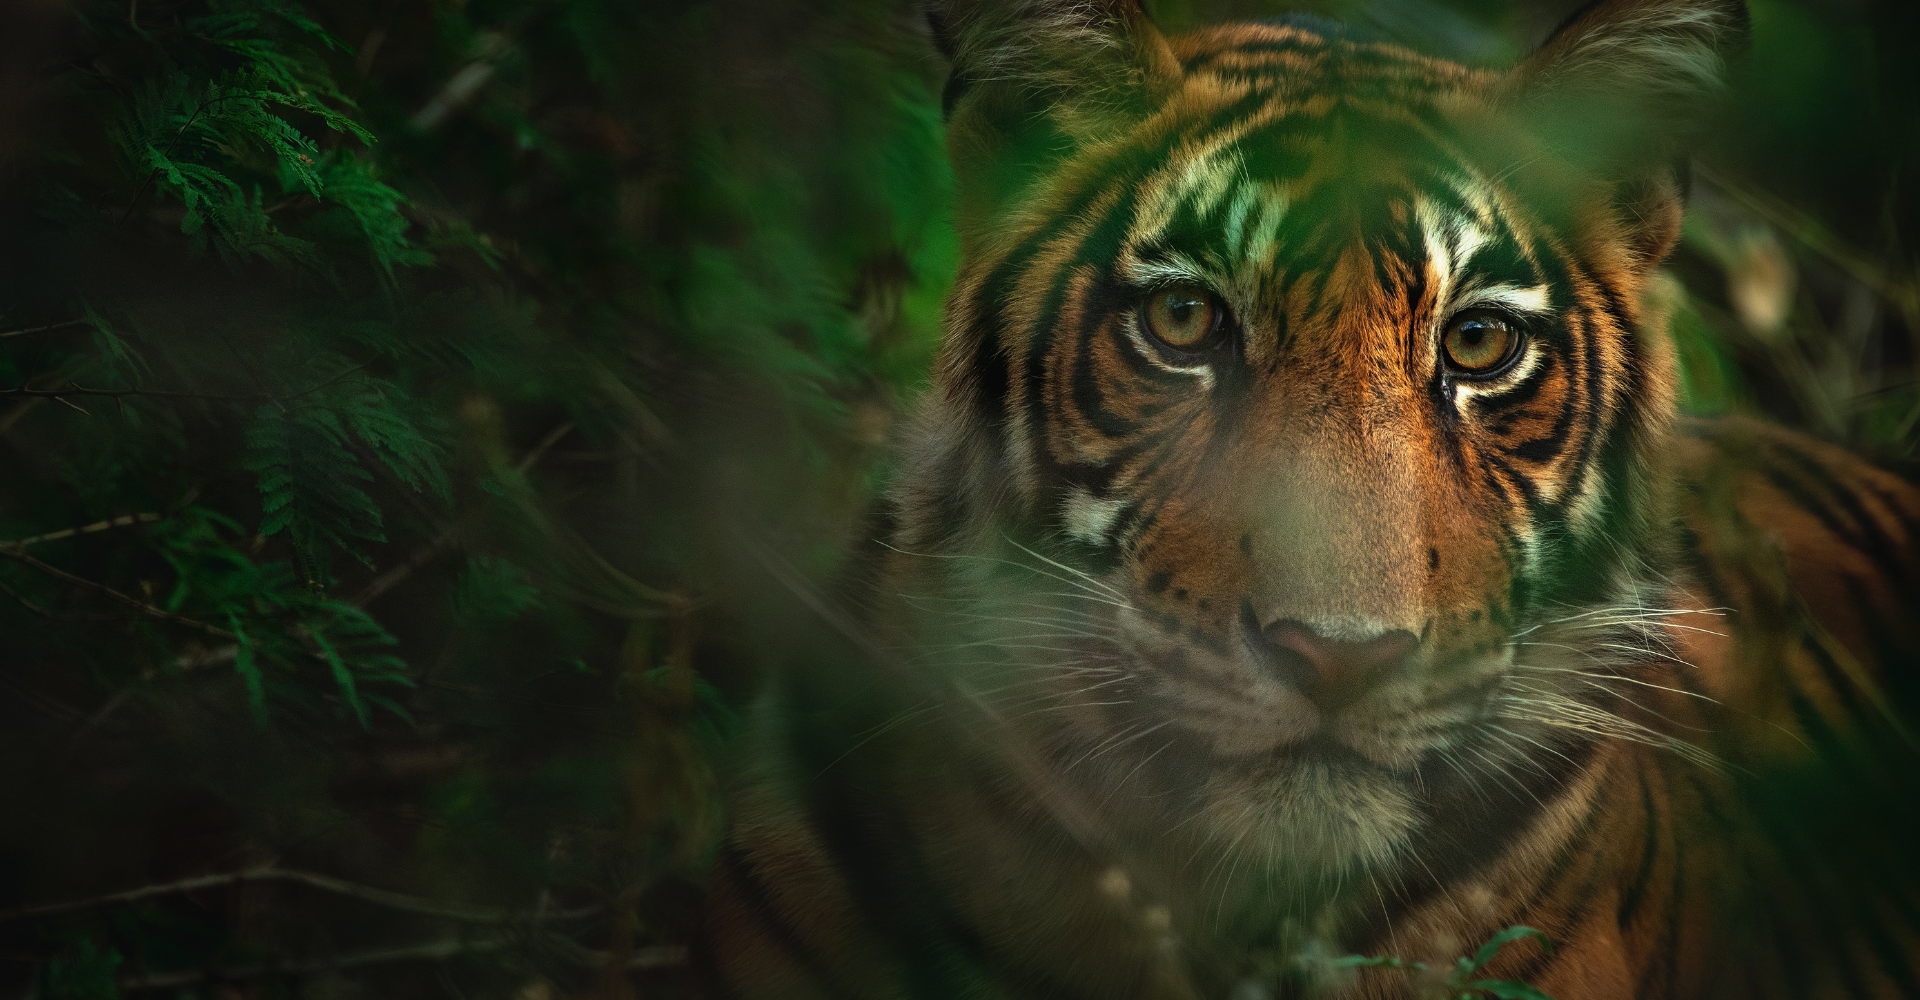 HCL and The Habitats Trust present – The Royal Bengal Tigers of